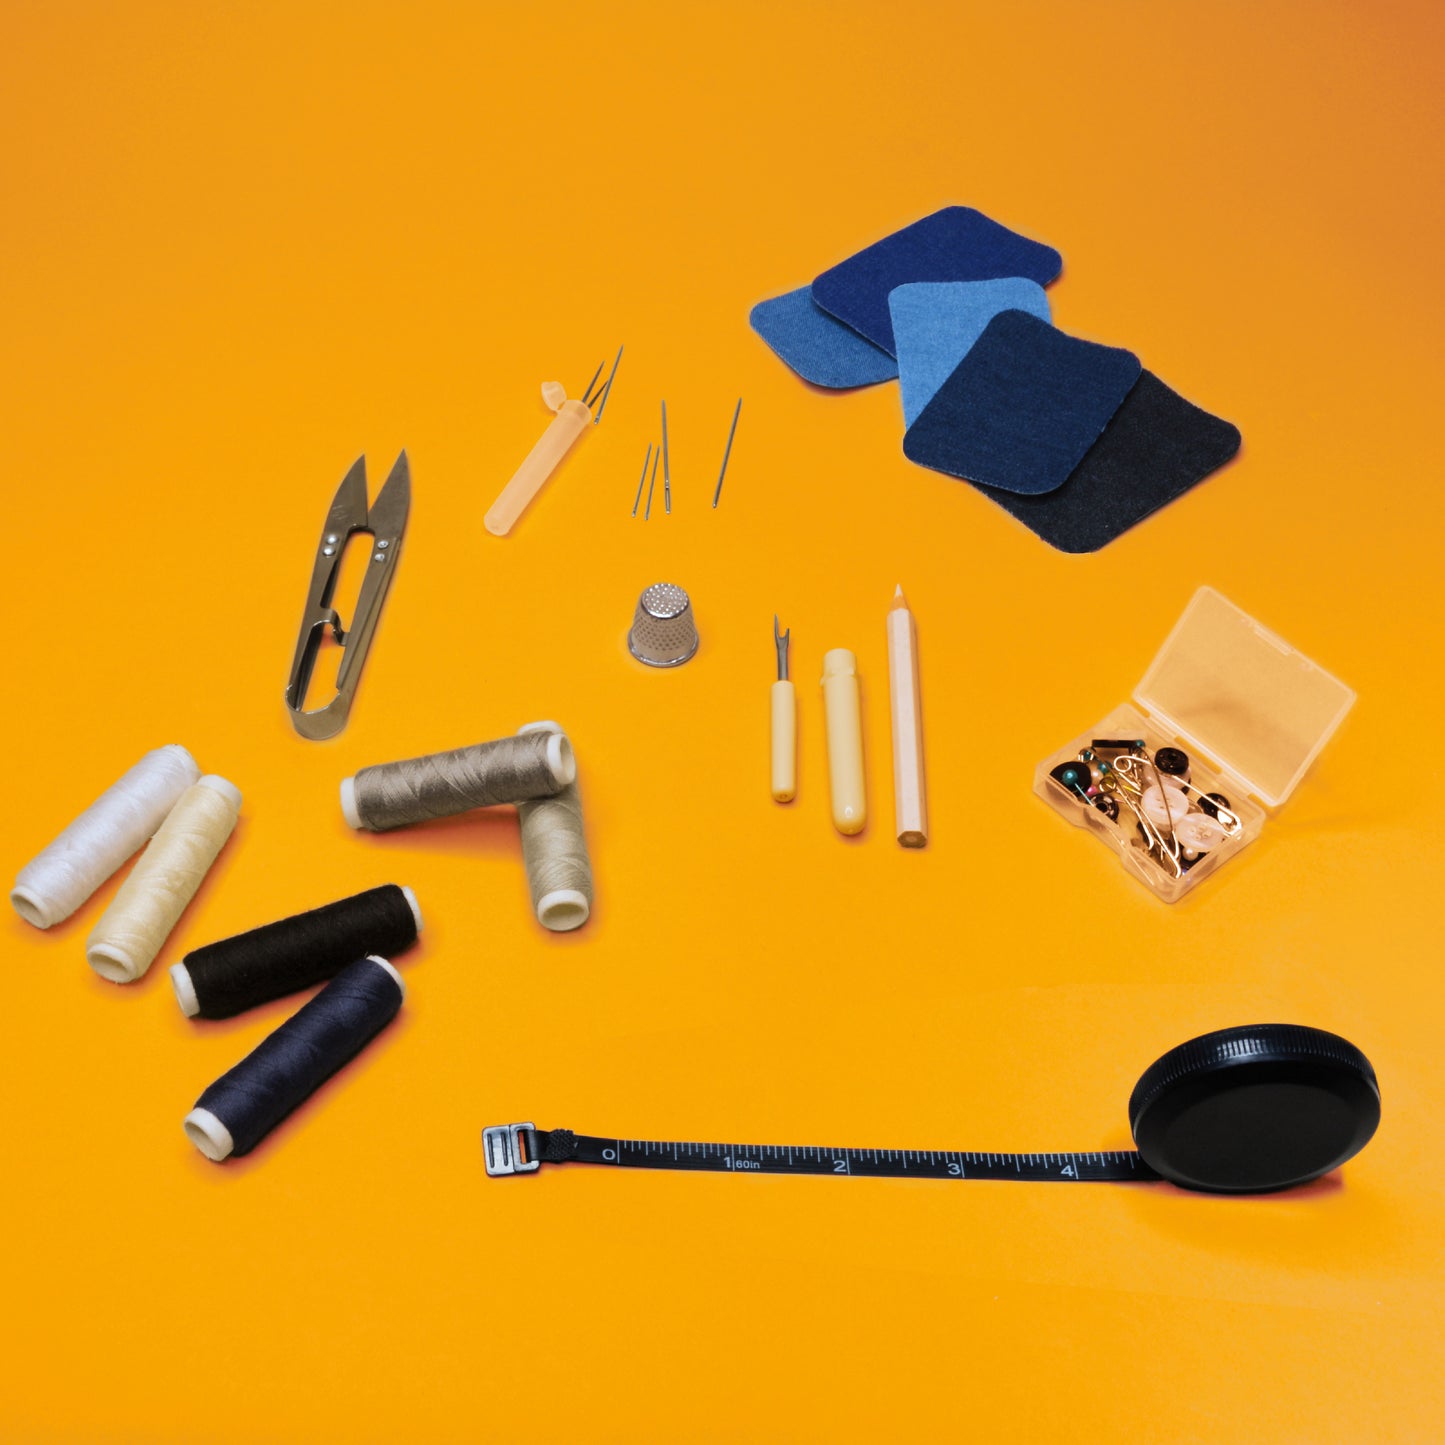 The contents of the Steamery sewing kit: thread scissors, sewing needles, fabric patches, six spools of thread, a seam ripper, a tape measure, a thimble, safety pins and buttons